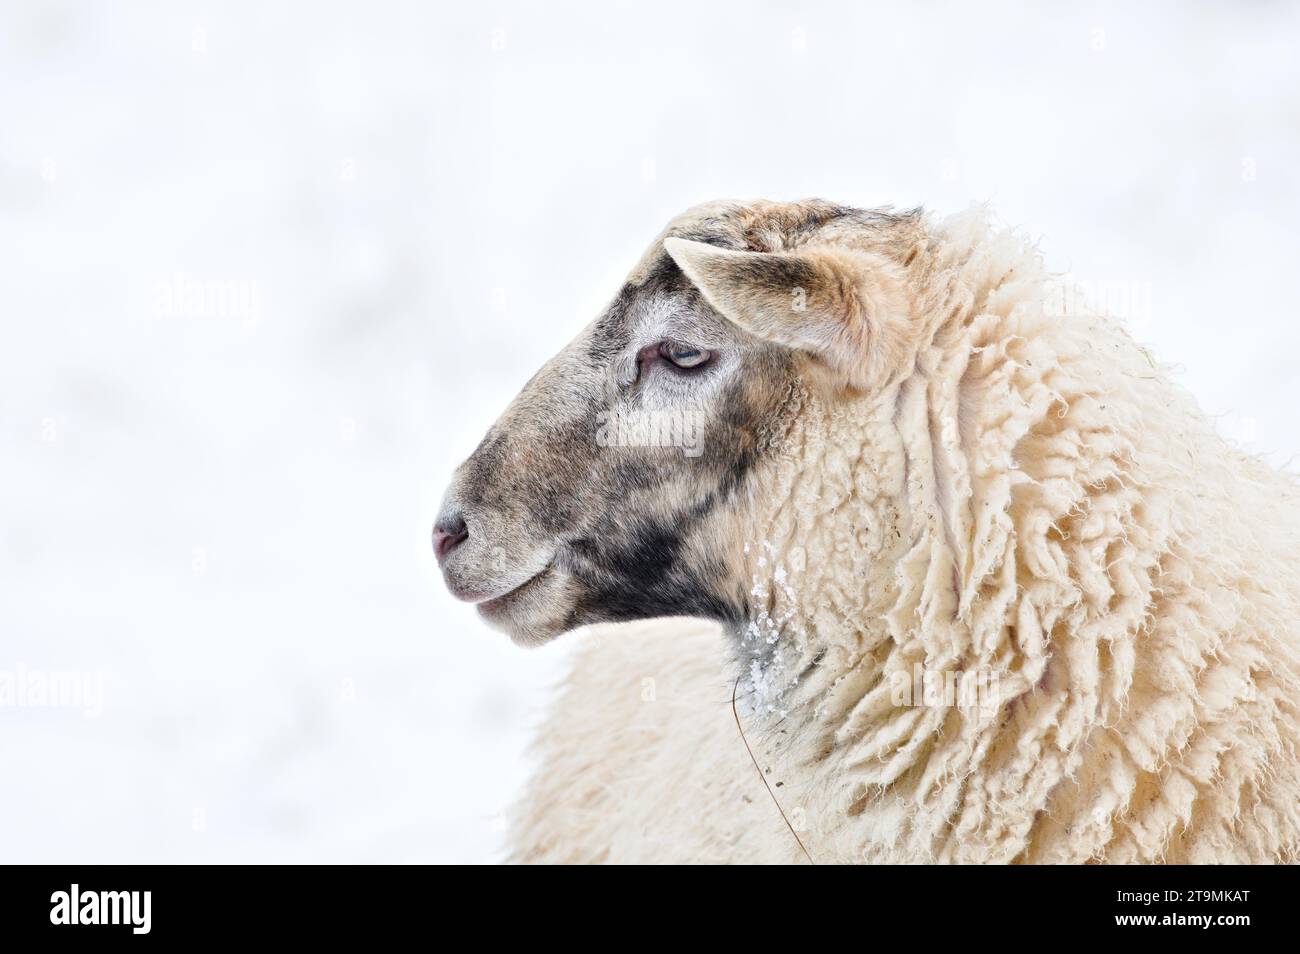 Domestic sheep close-up portrait on the winter pasture covered by snow. Livestock on small farm in Czech republic countryside. Copy space for text. Stock Photo